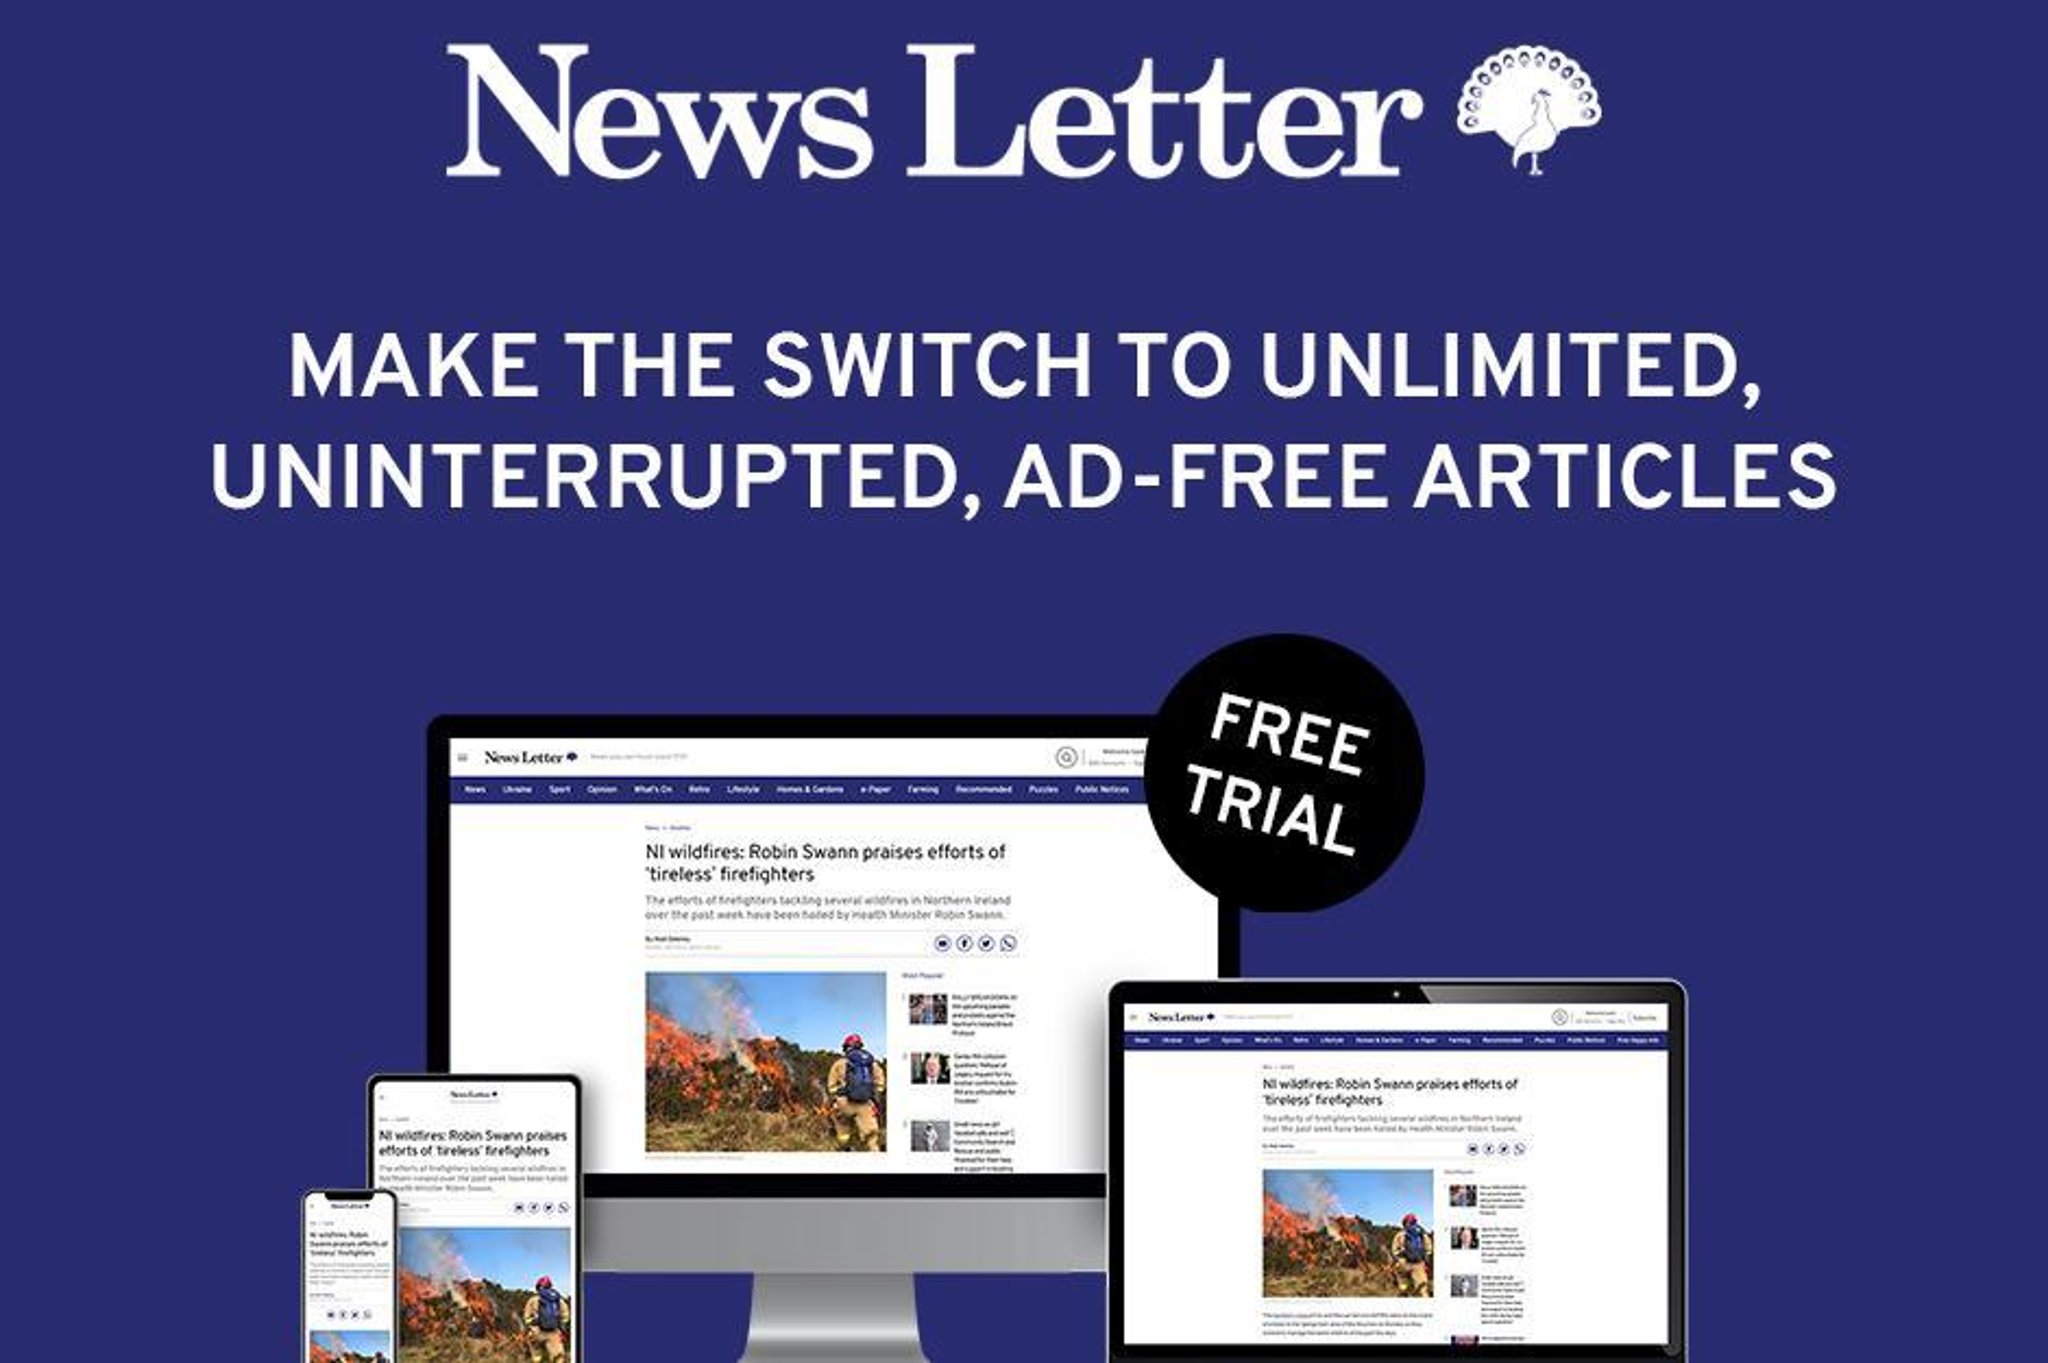 News Letter subscriptions: Make a saving with the News Letter's spring offer and start your ad-free experience for free